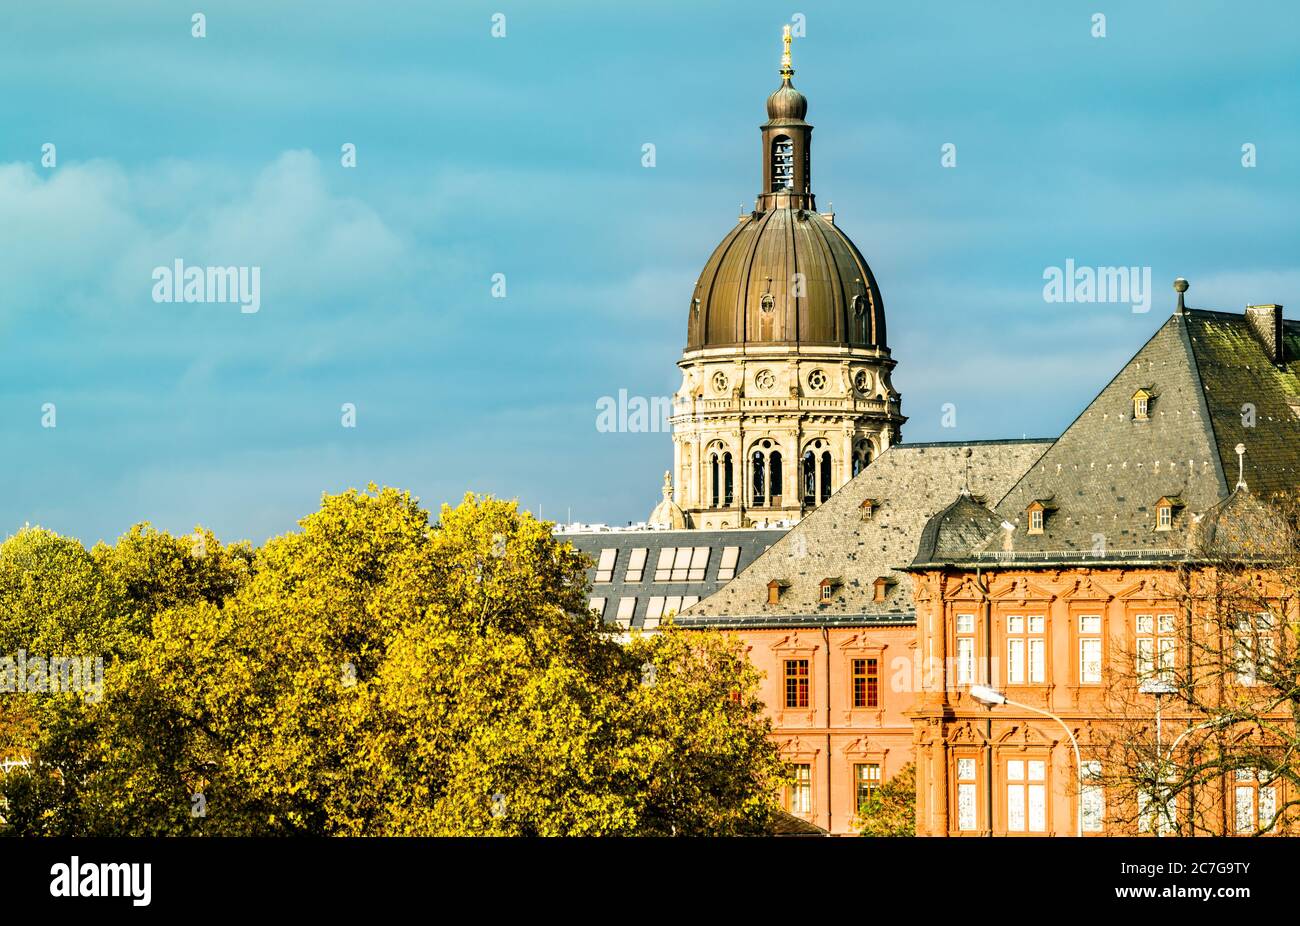 The Electoral Palace and the Christ Church in Mainz, Germany Stock Photo